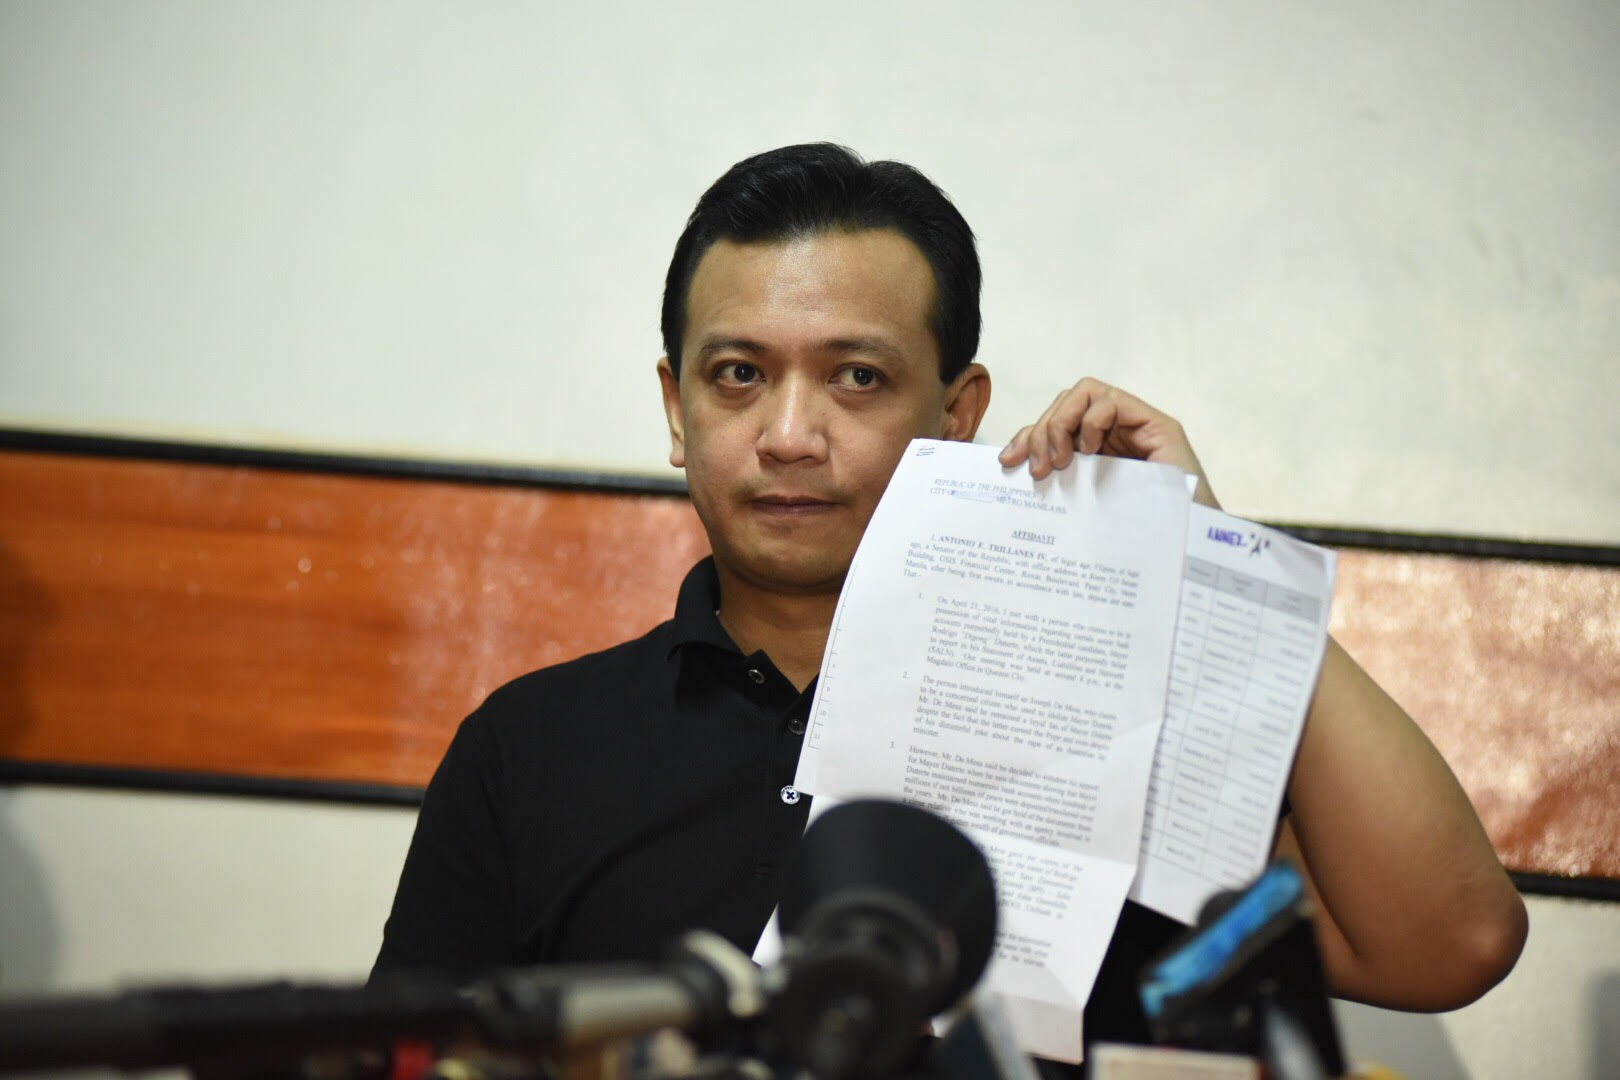 AFFIDAVIT. Senator Antonio Trillanes IV shows the affidavit requested by the camp of Mayor Rodrigo Duterte for the latter to release the mayor's BPI bank statements and transaction history, at the Magdalo Headquarters in Quezon City, May 2, 2016. Photo by Martin San Diego/Rappler 